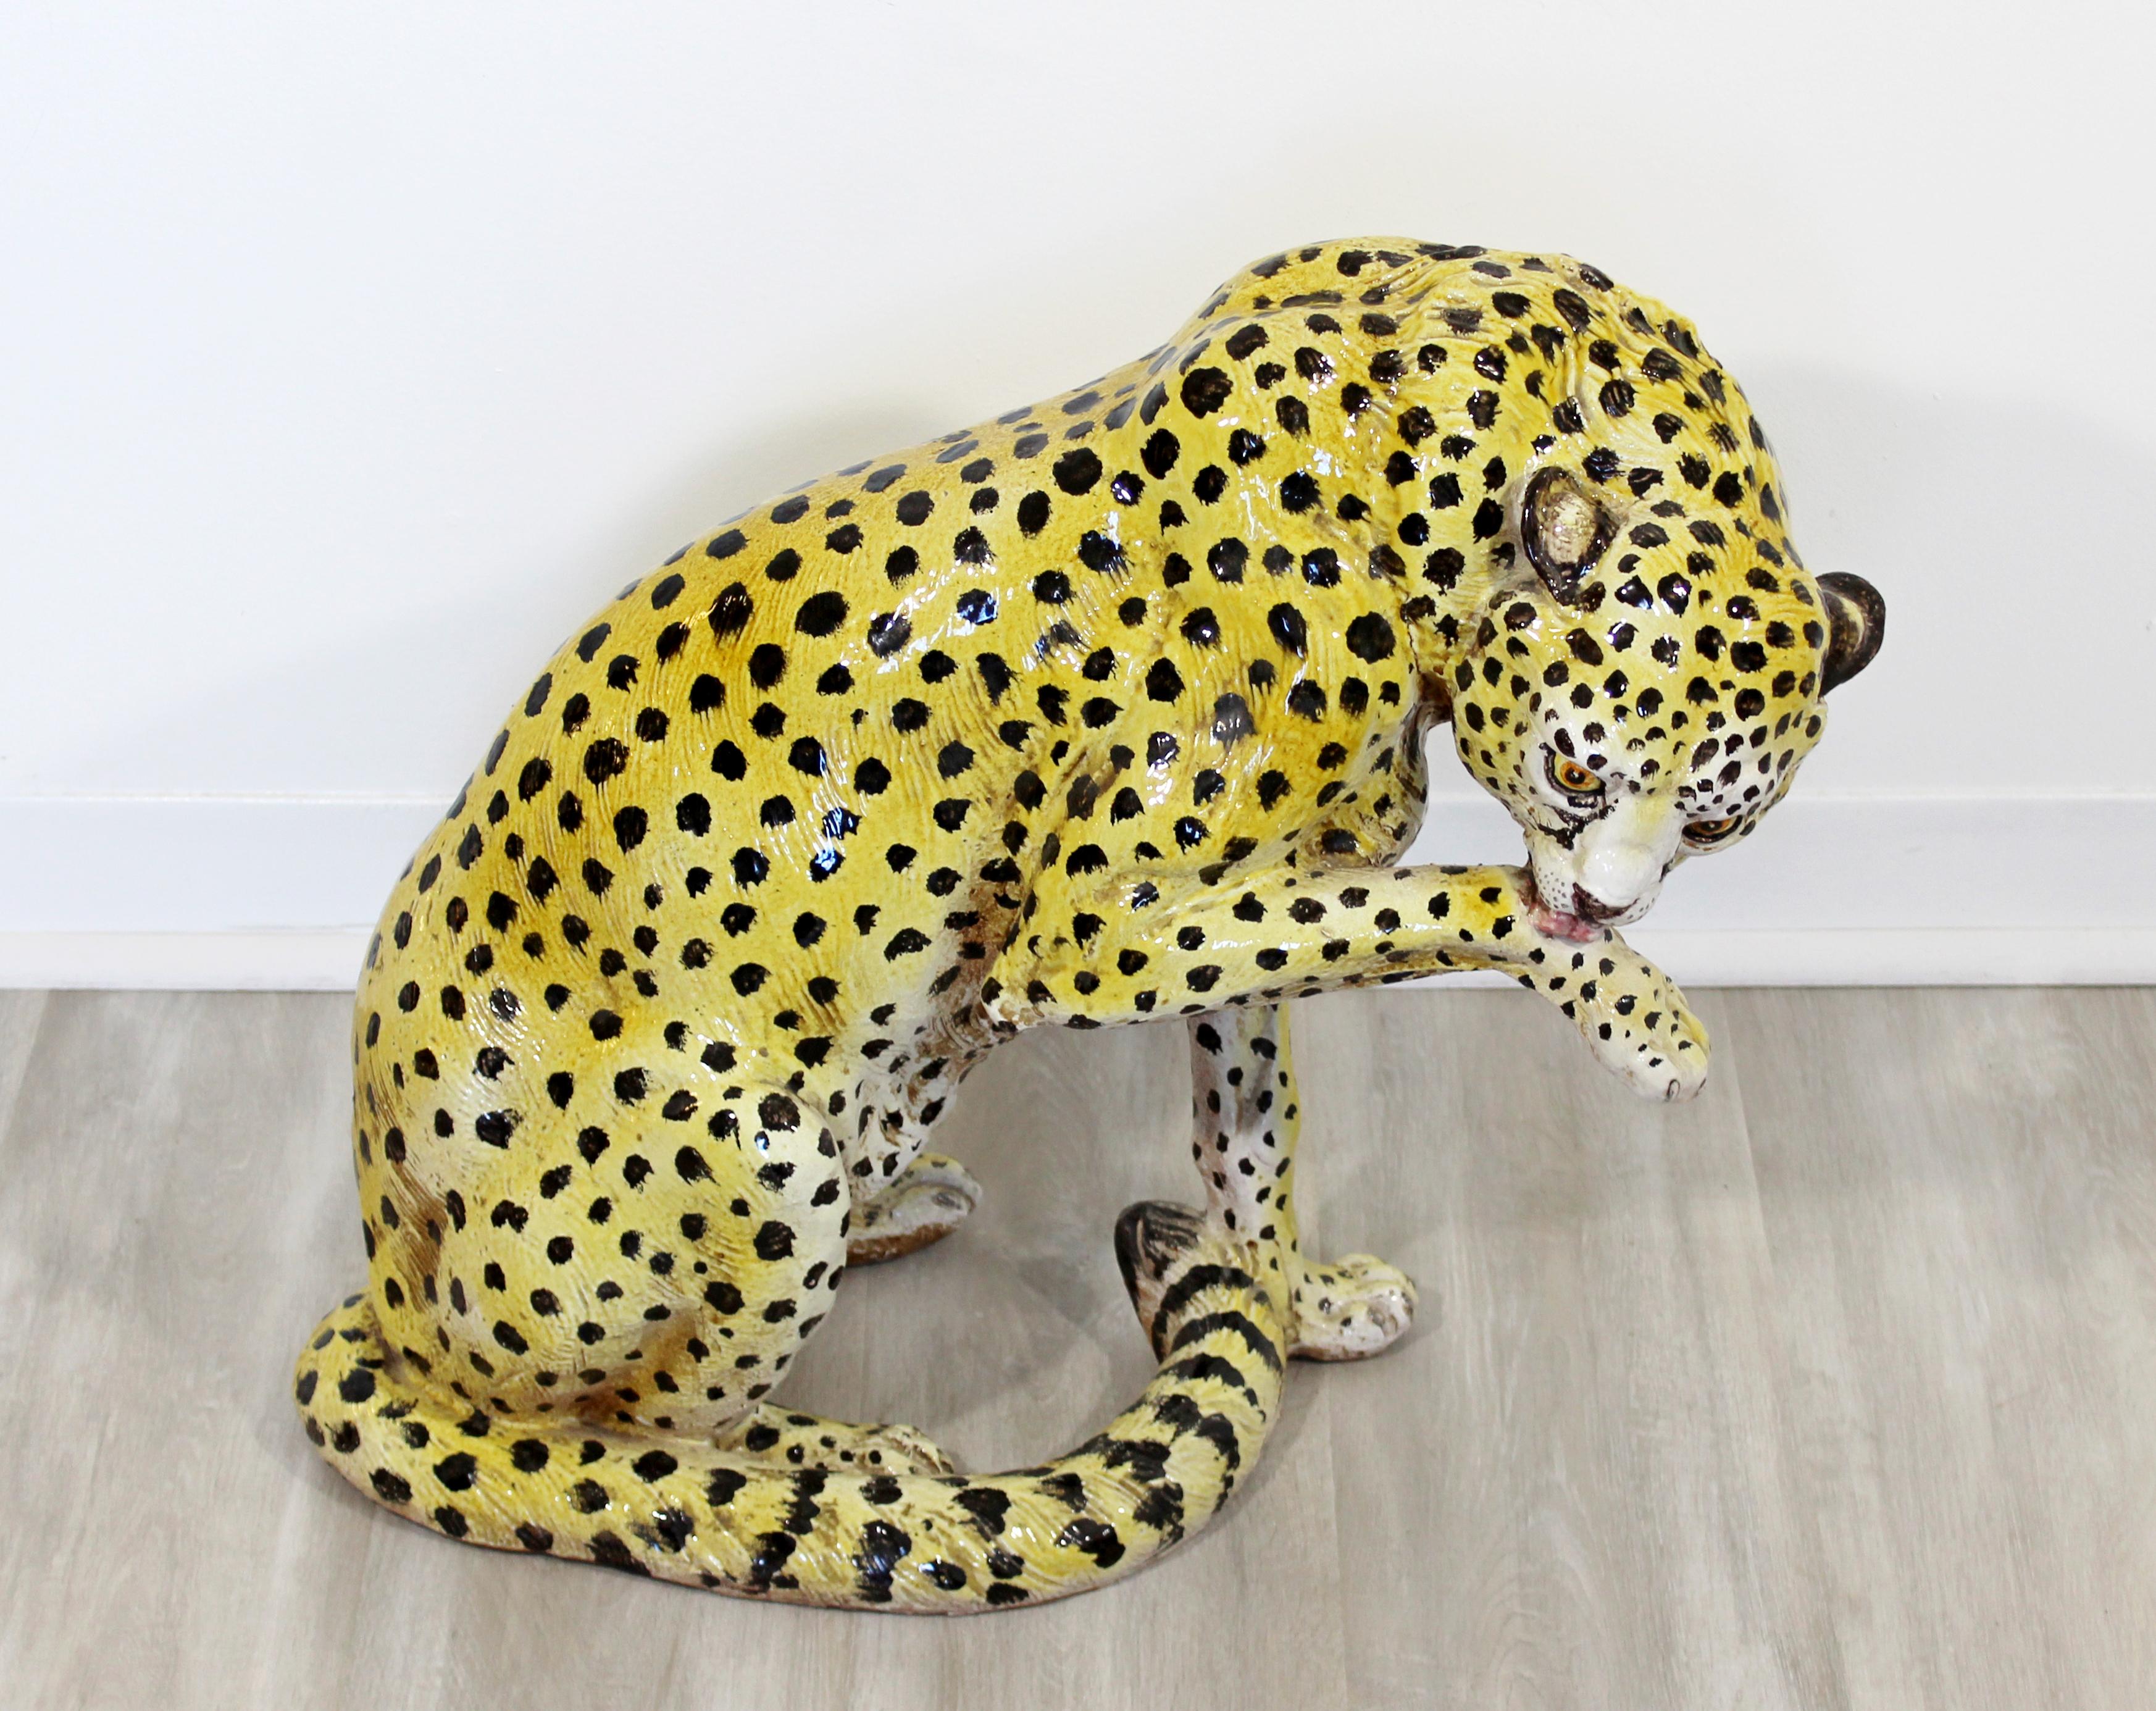 For your consideration is a beautiful, painted porcelain floor sculpture of a cheetah or leopard, made in Italy, circa 1970s. In very good vintage condition. The dimensions are 22